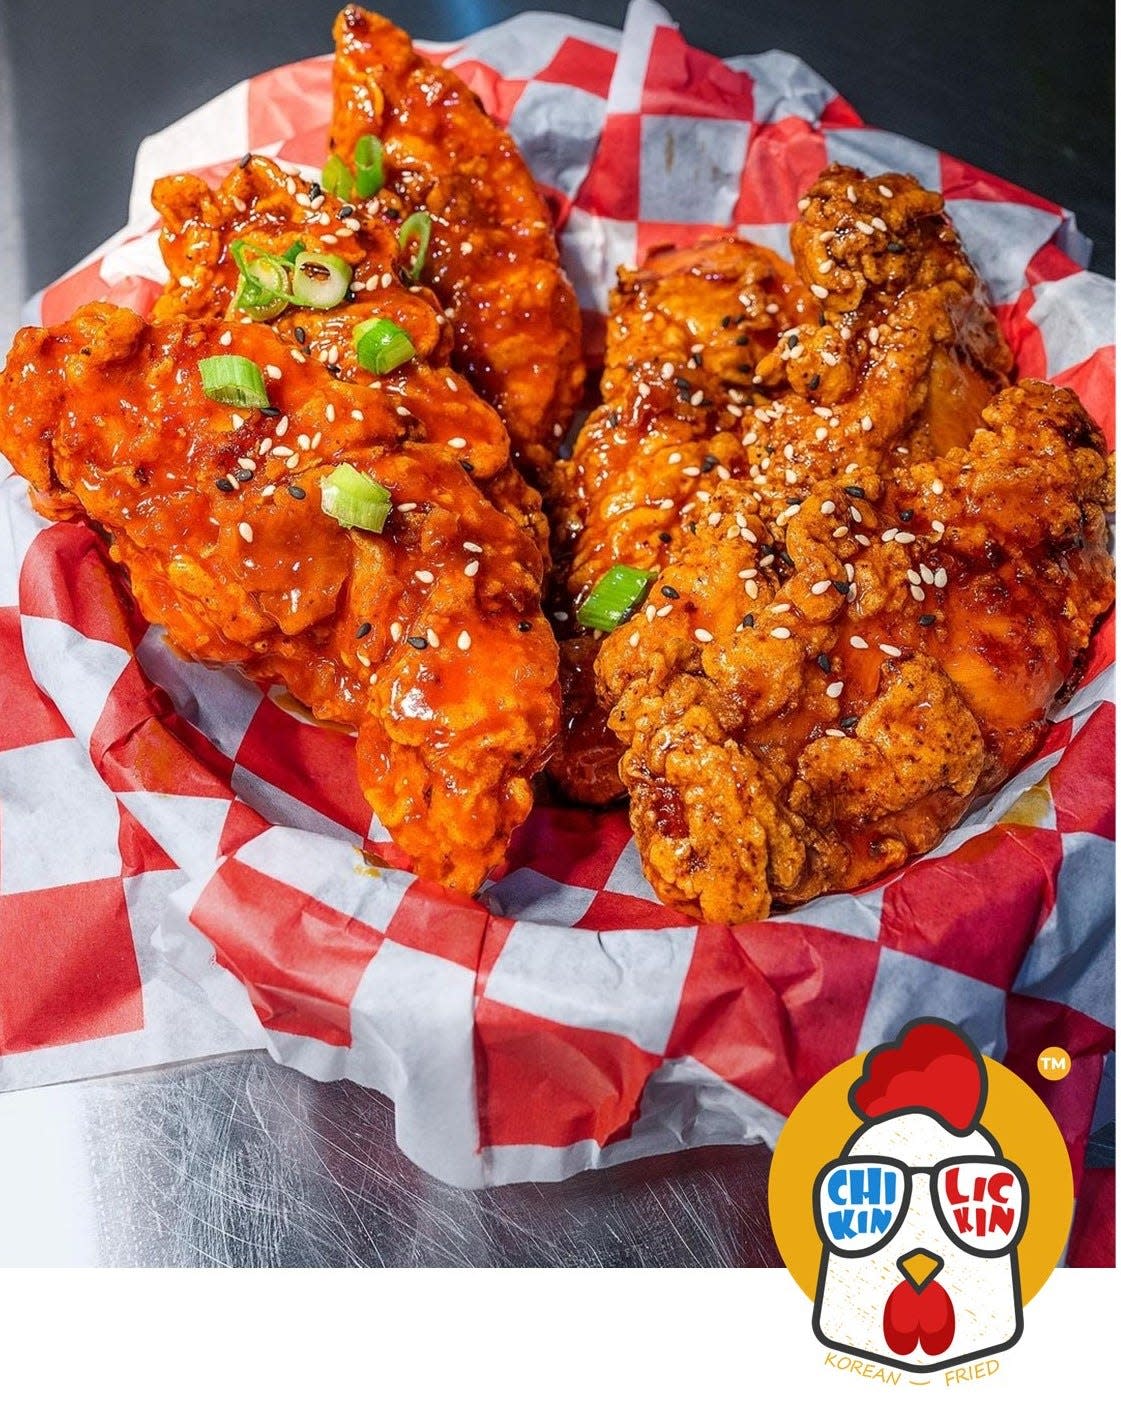 Double-fried Korean fried chicken takes center stage at Chikin Lickin.